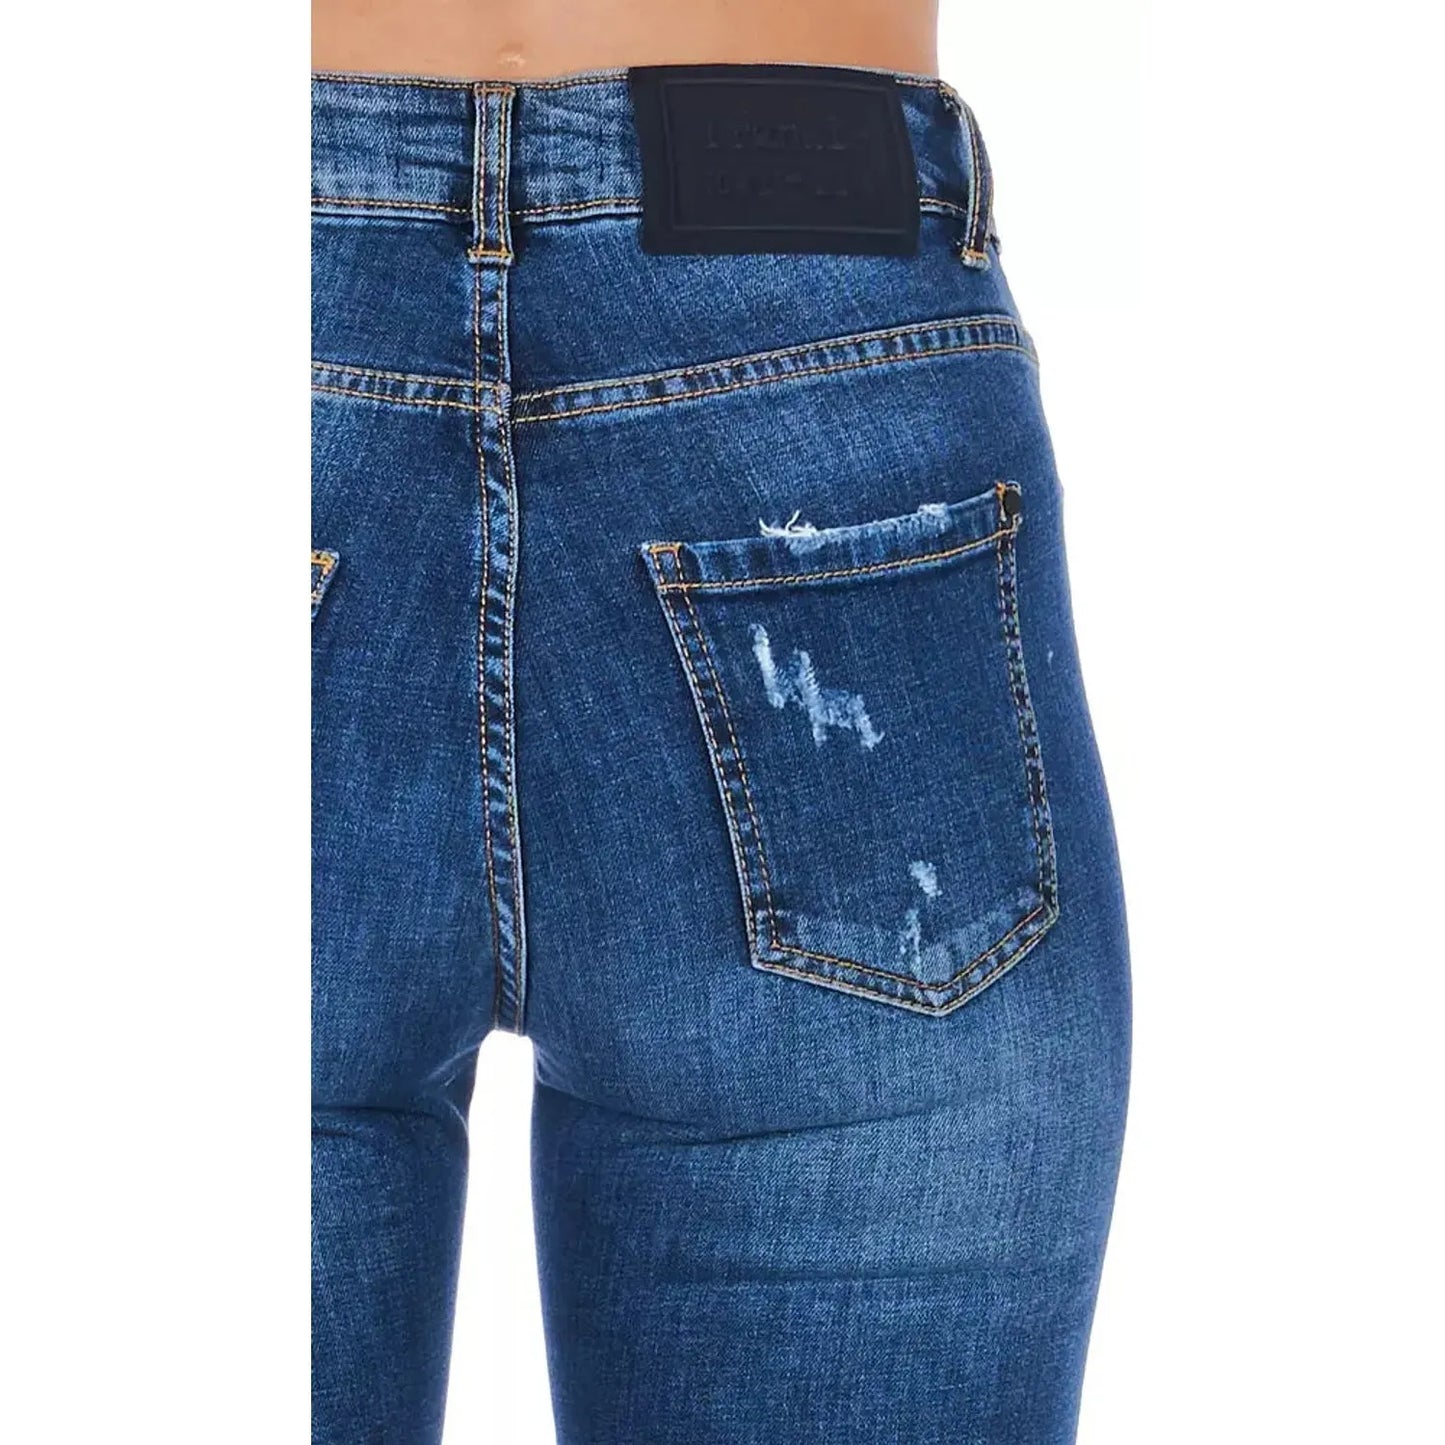 Frankie Morello Chic Worn Wash Denim Jeans for Sophisticated Style blue-jeans-pant-5 product-21771-1289551663-23-89bd3a9f-447.webp